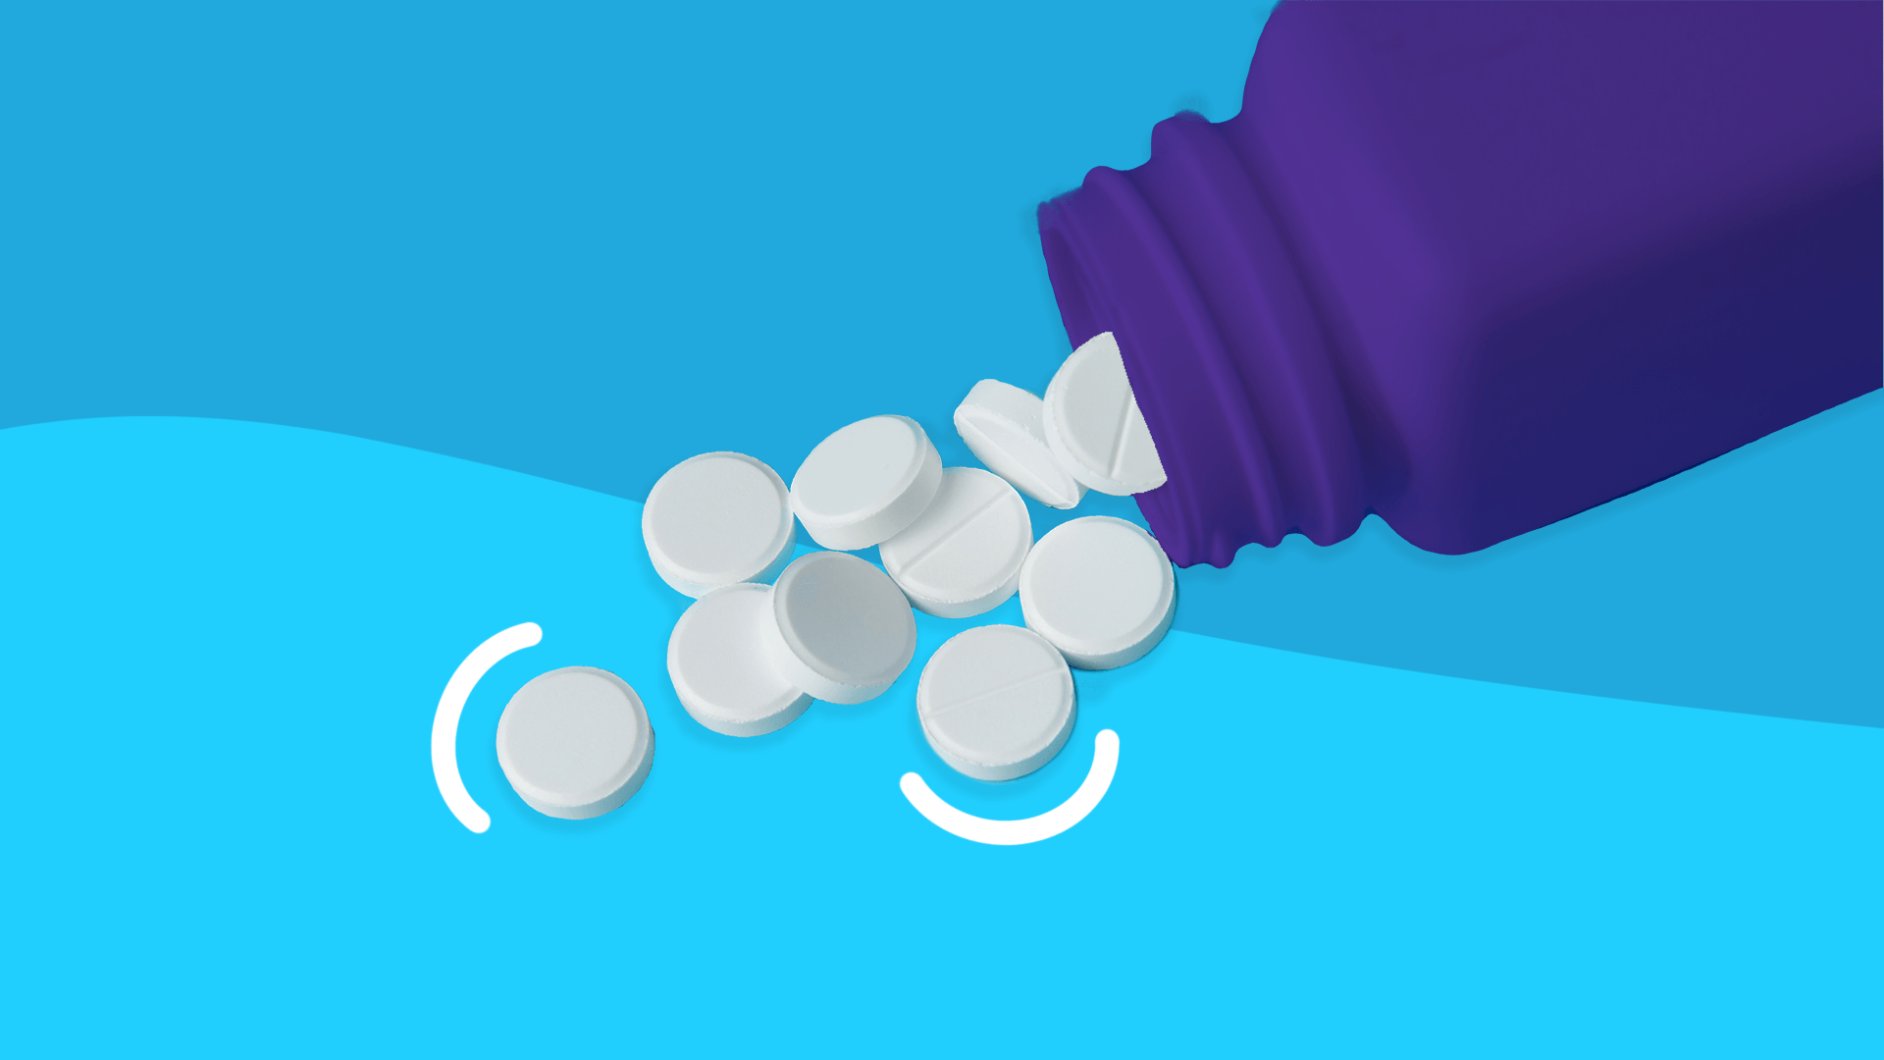 A bottle of pills spilled over: Paxlovid side effects